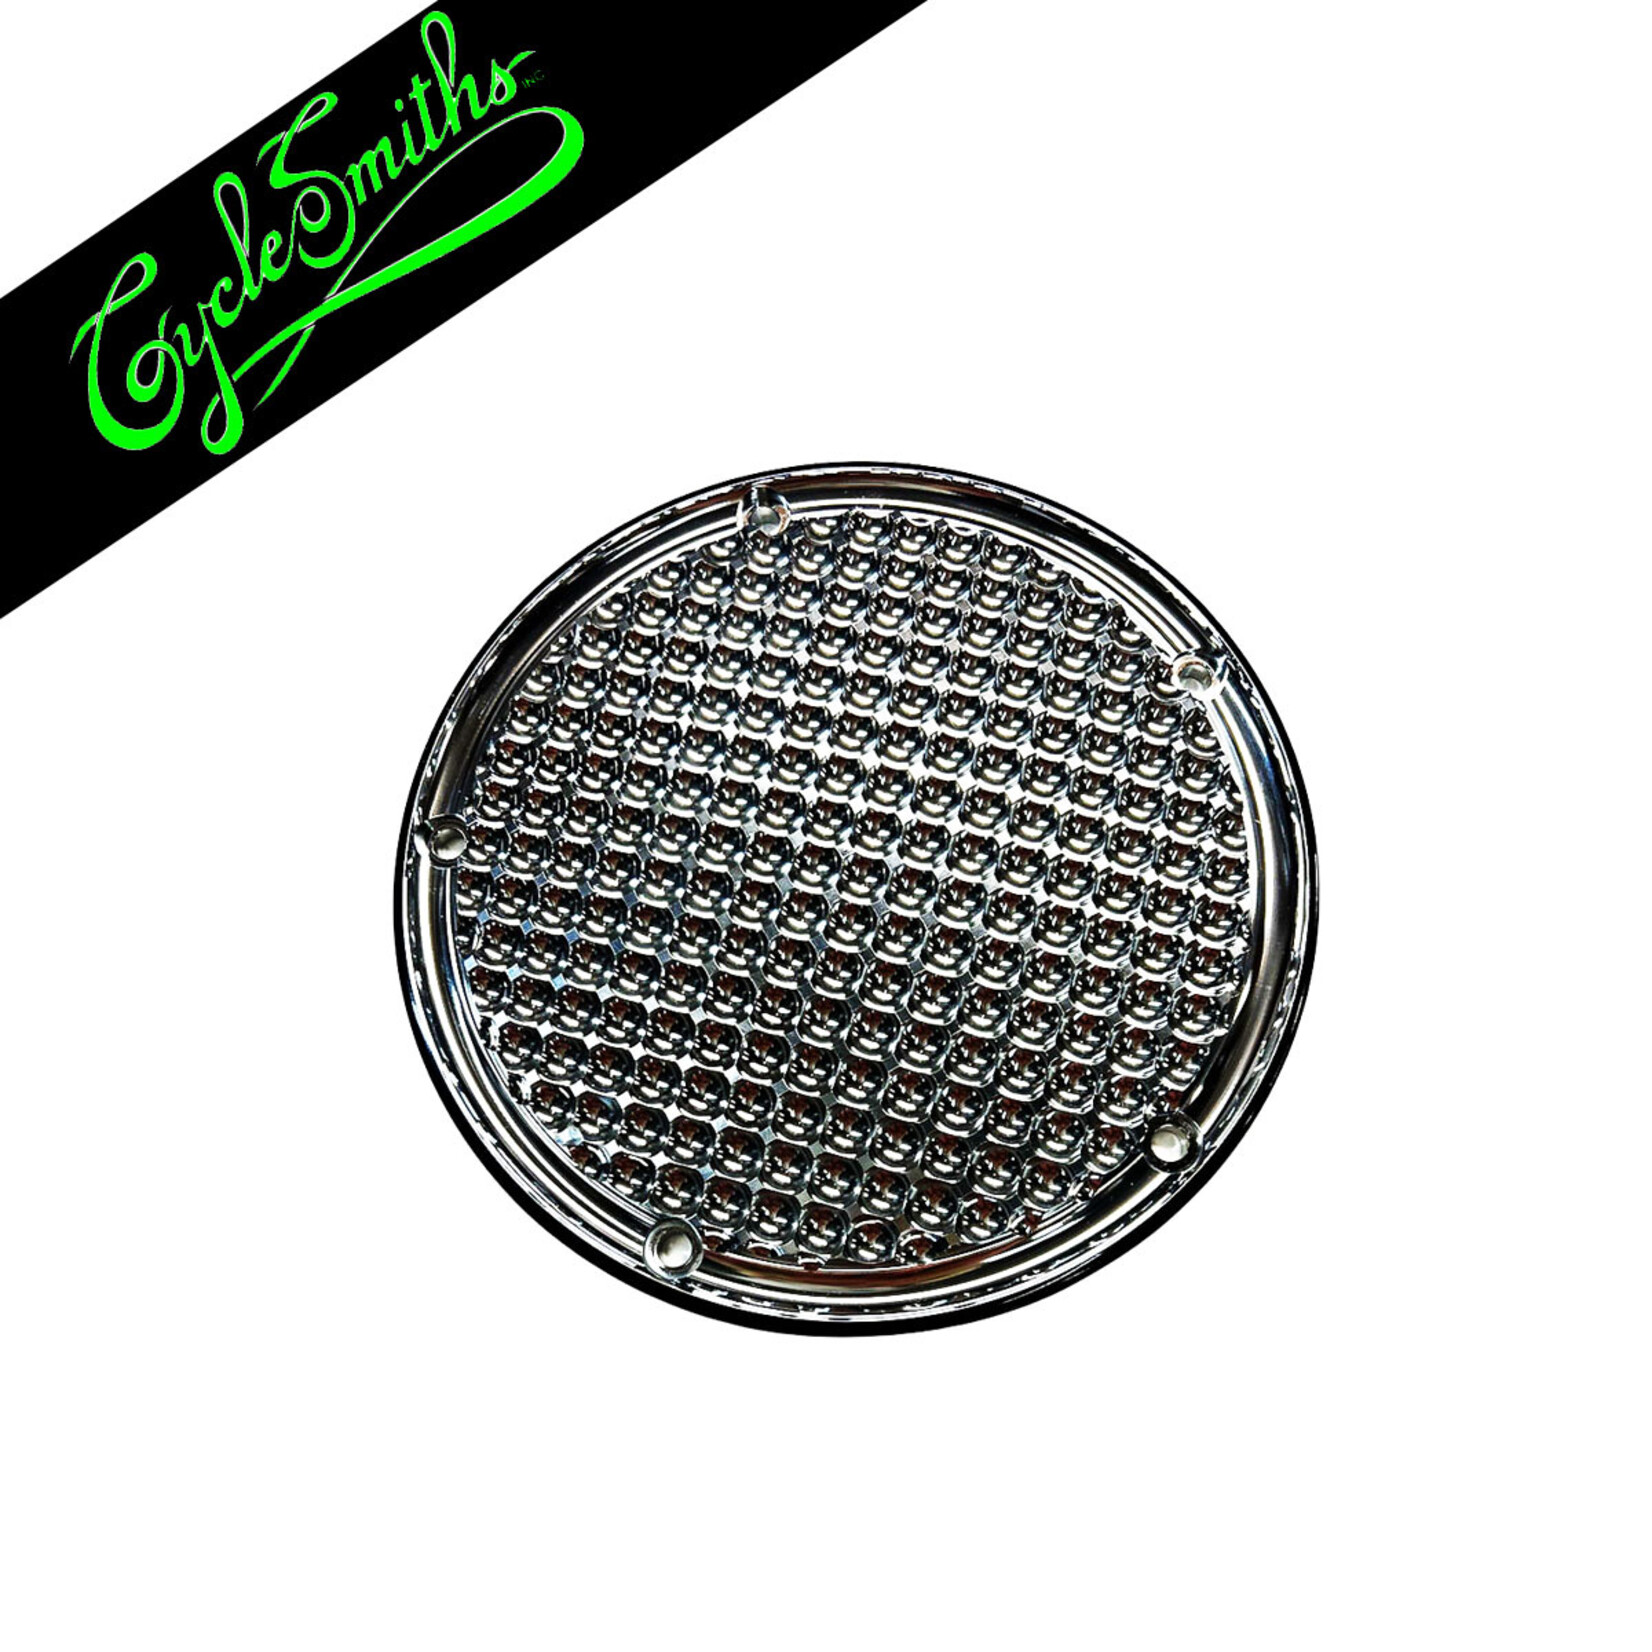 CYCLE SMITHS CYCLESMITHS SHREDDER TWIN CAM DERBY COVER - CHROME